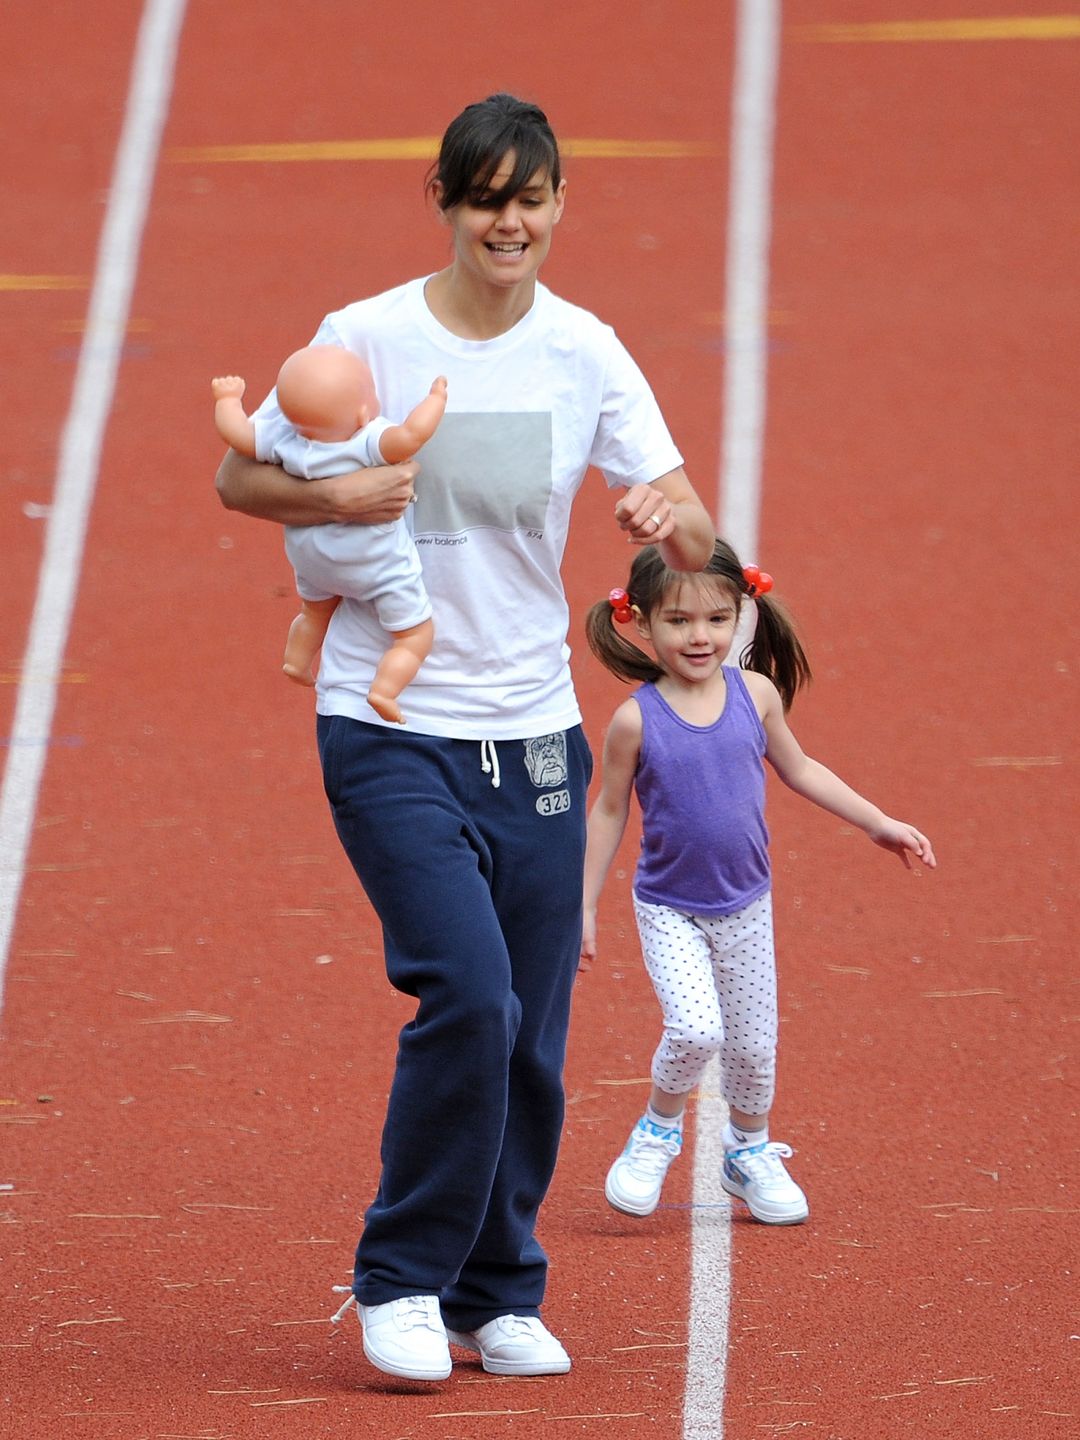 Katie Holmes and her daughter Suri Cruise run on a track field on October 12, 2009 in Boston, Massachusetts.